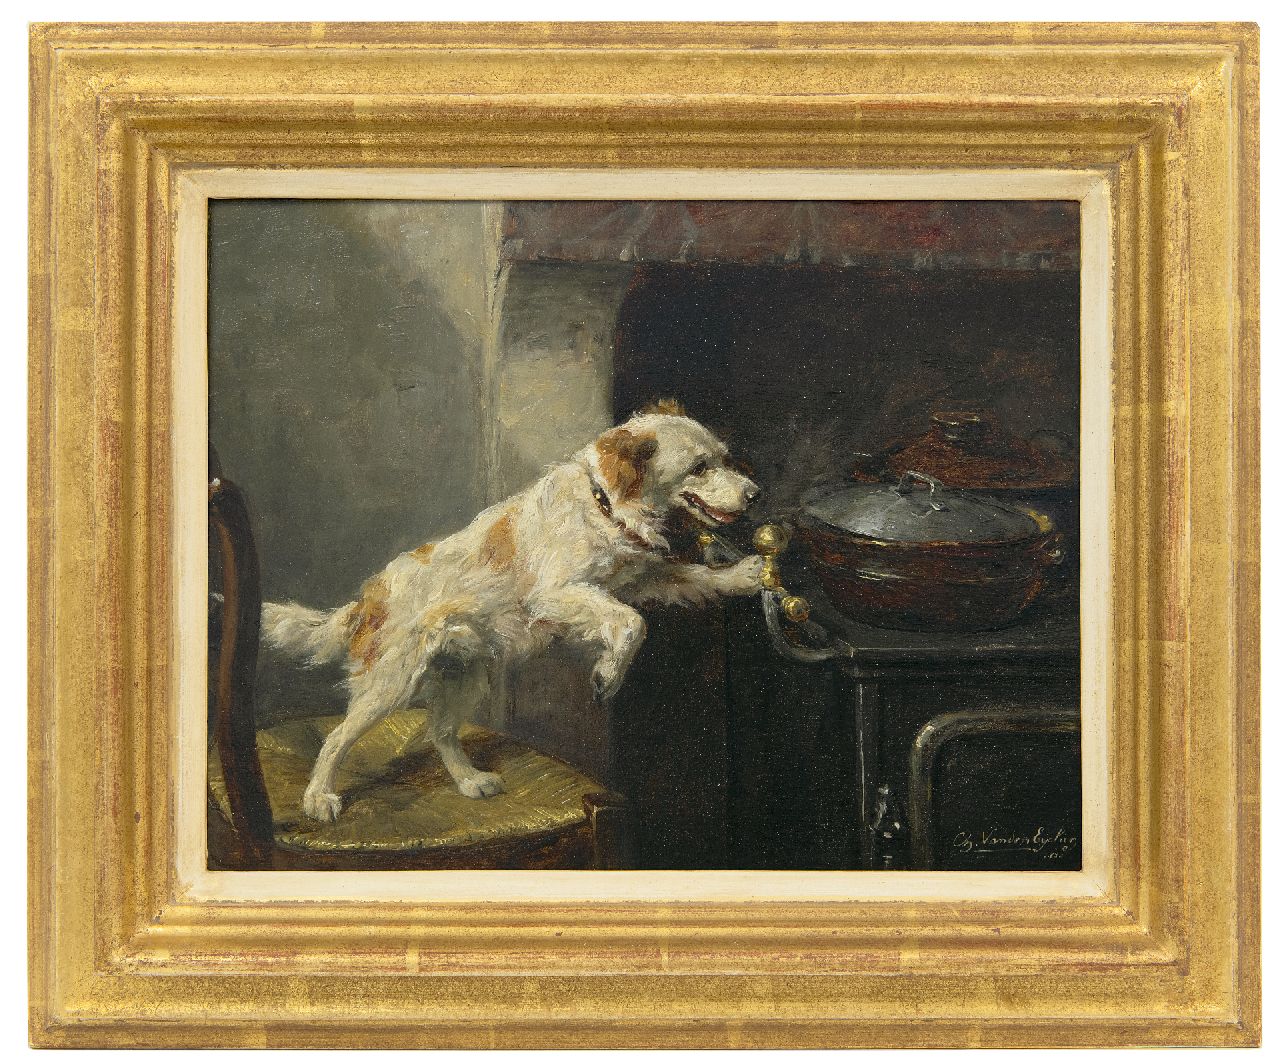 Eycken Ch. van den | Charles van den Eycken, Alone in the kitchen, oil on panel 21.4 x 27.8 cm, signed l.r. and dated 1880 and on the reverse 6.3.80